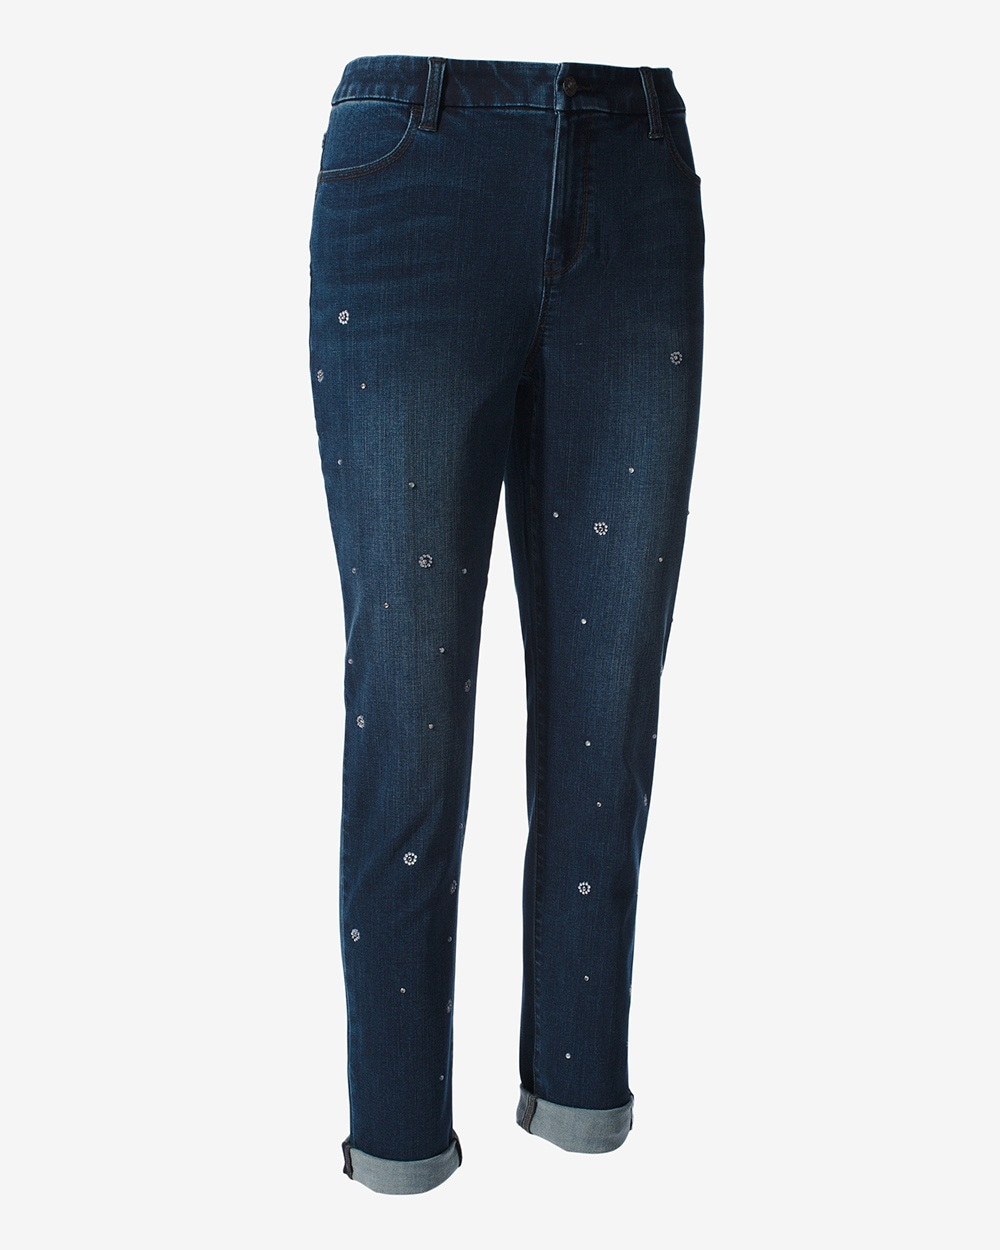 Embellished Crystals Girlfriend Jeans